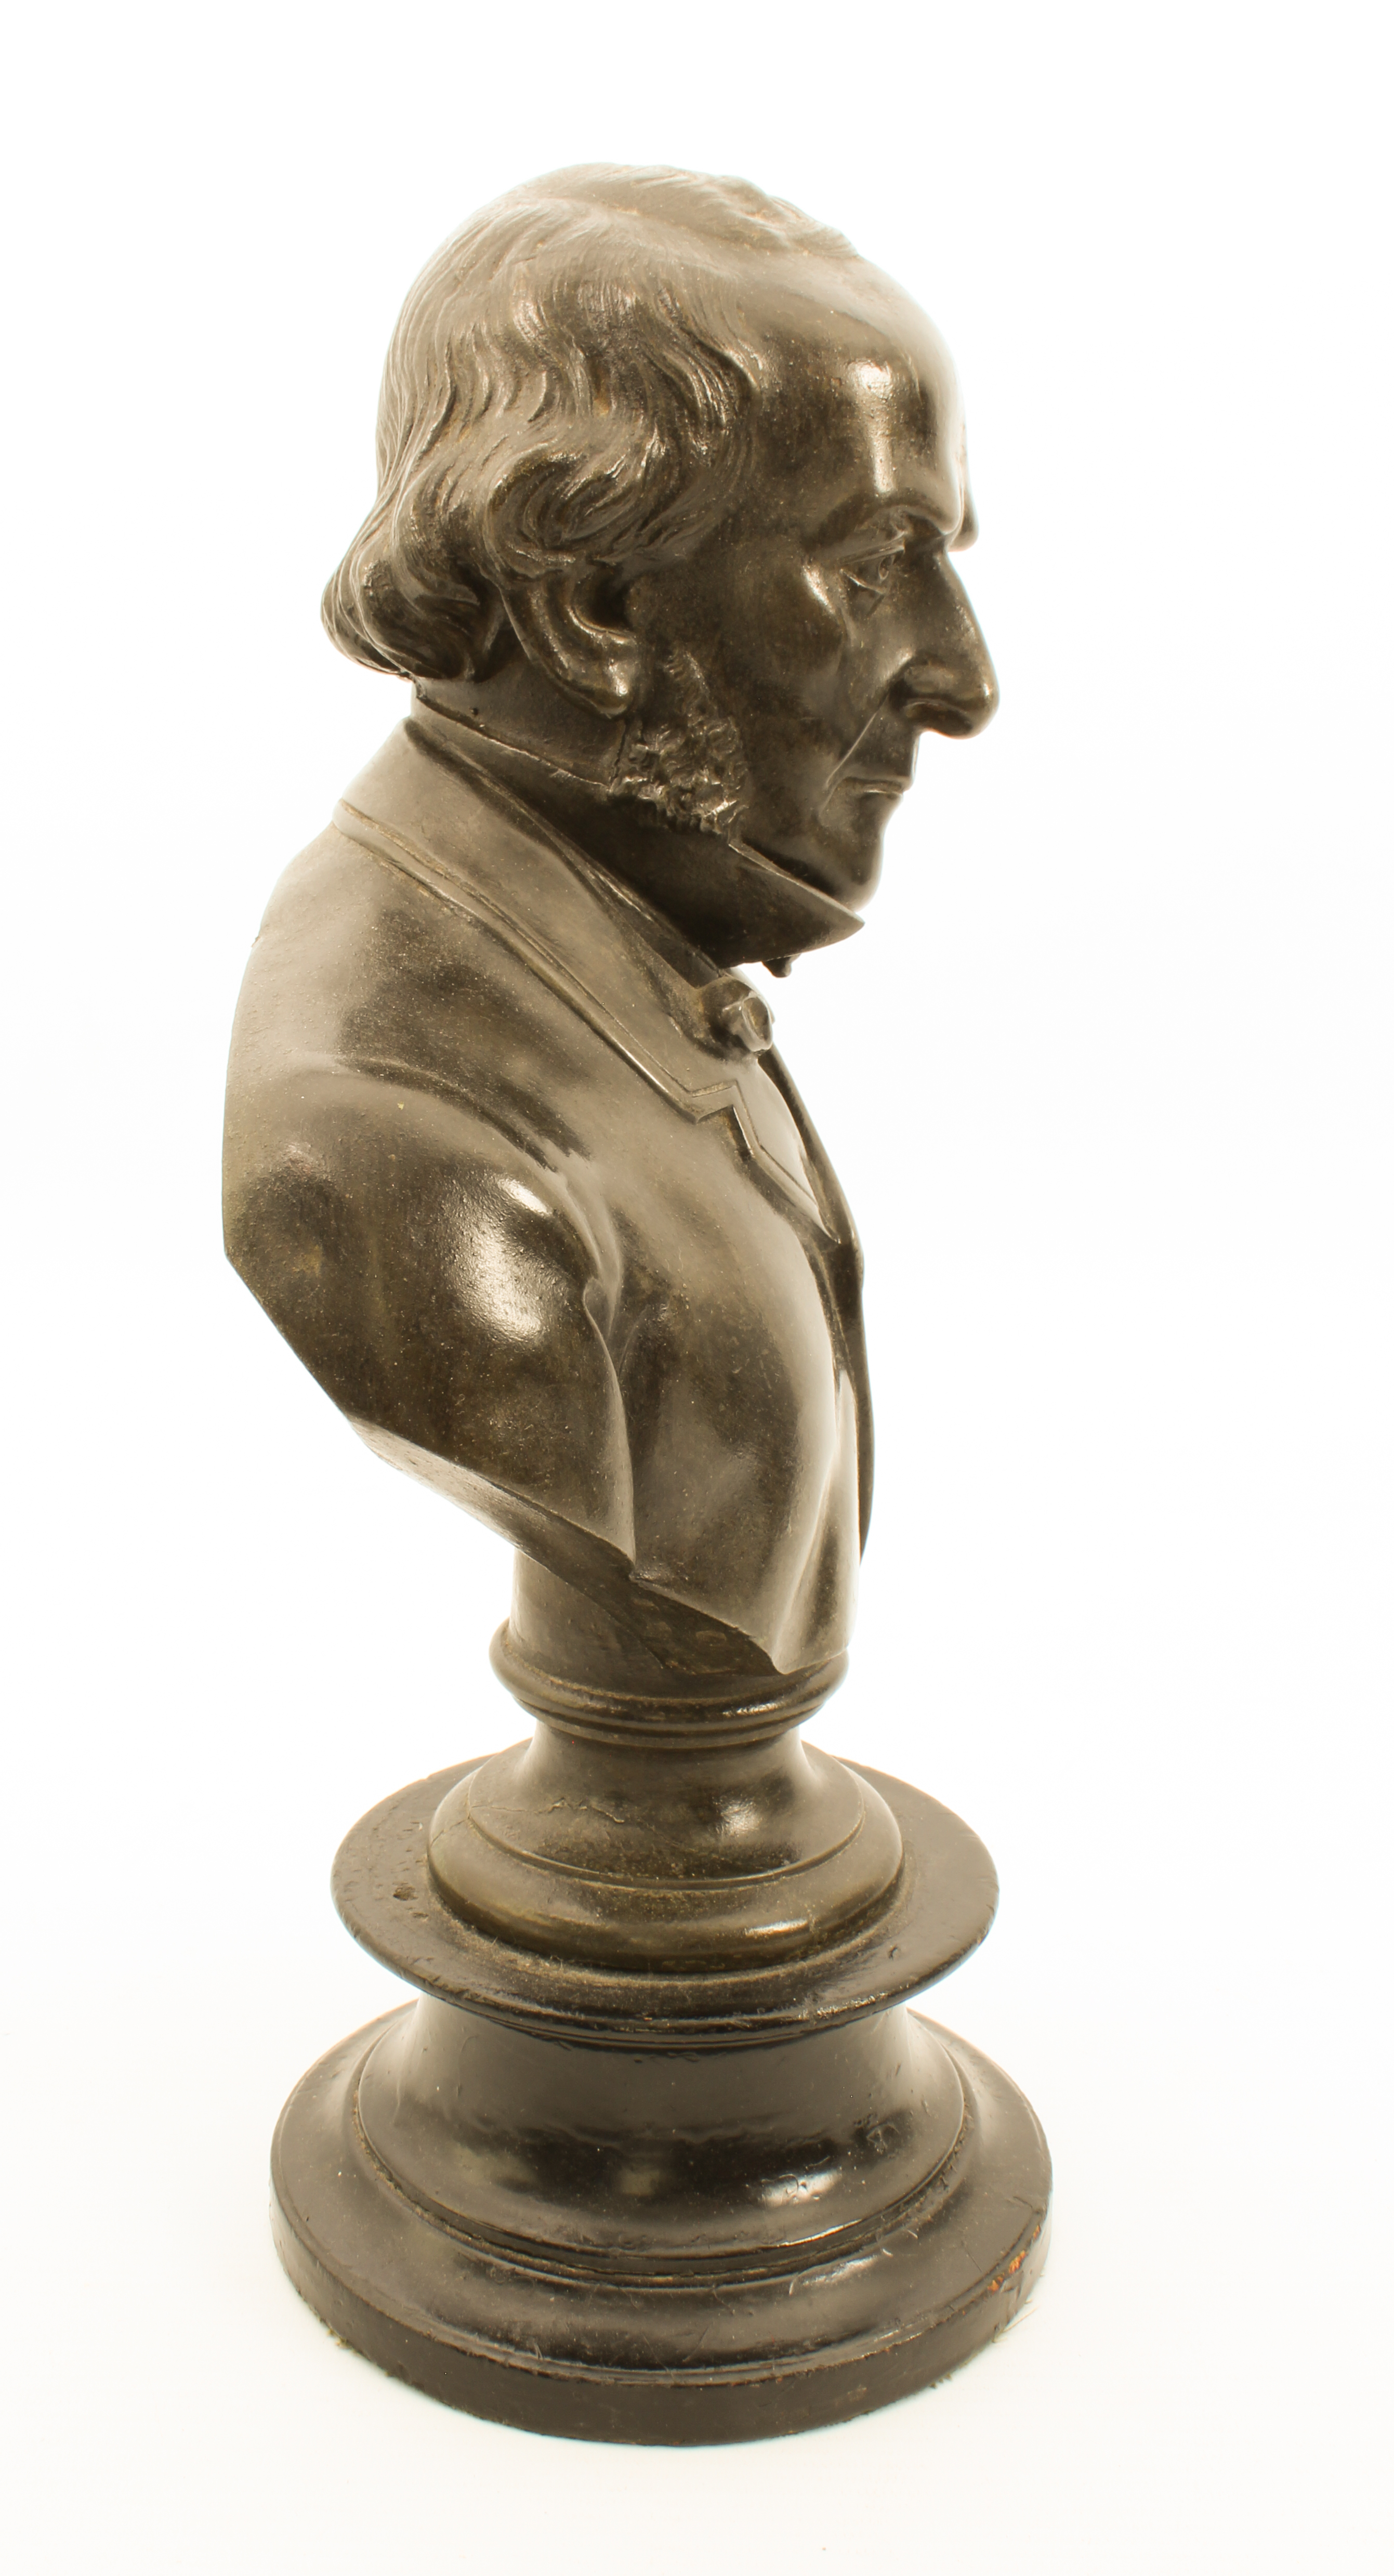 A bronzed spelter bust of Sir William Gladstone - 19th century, signed to the reverse 'Wright &